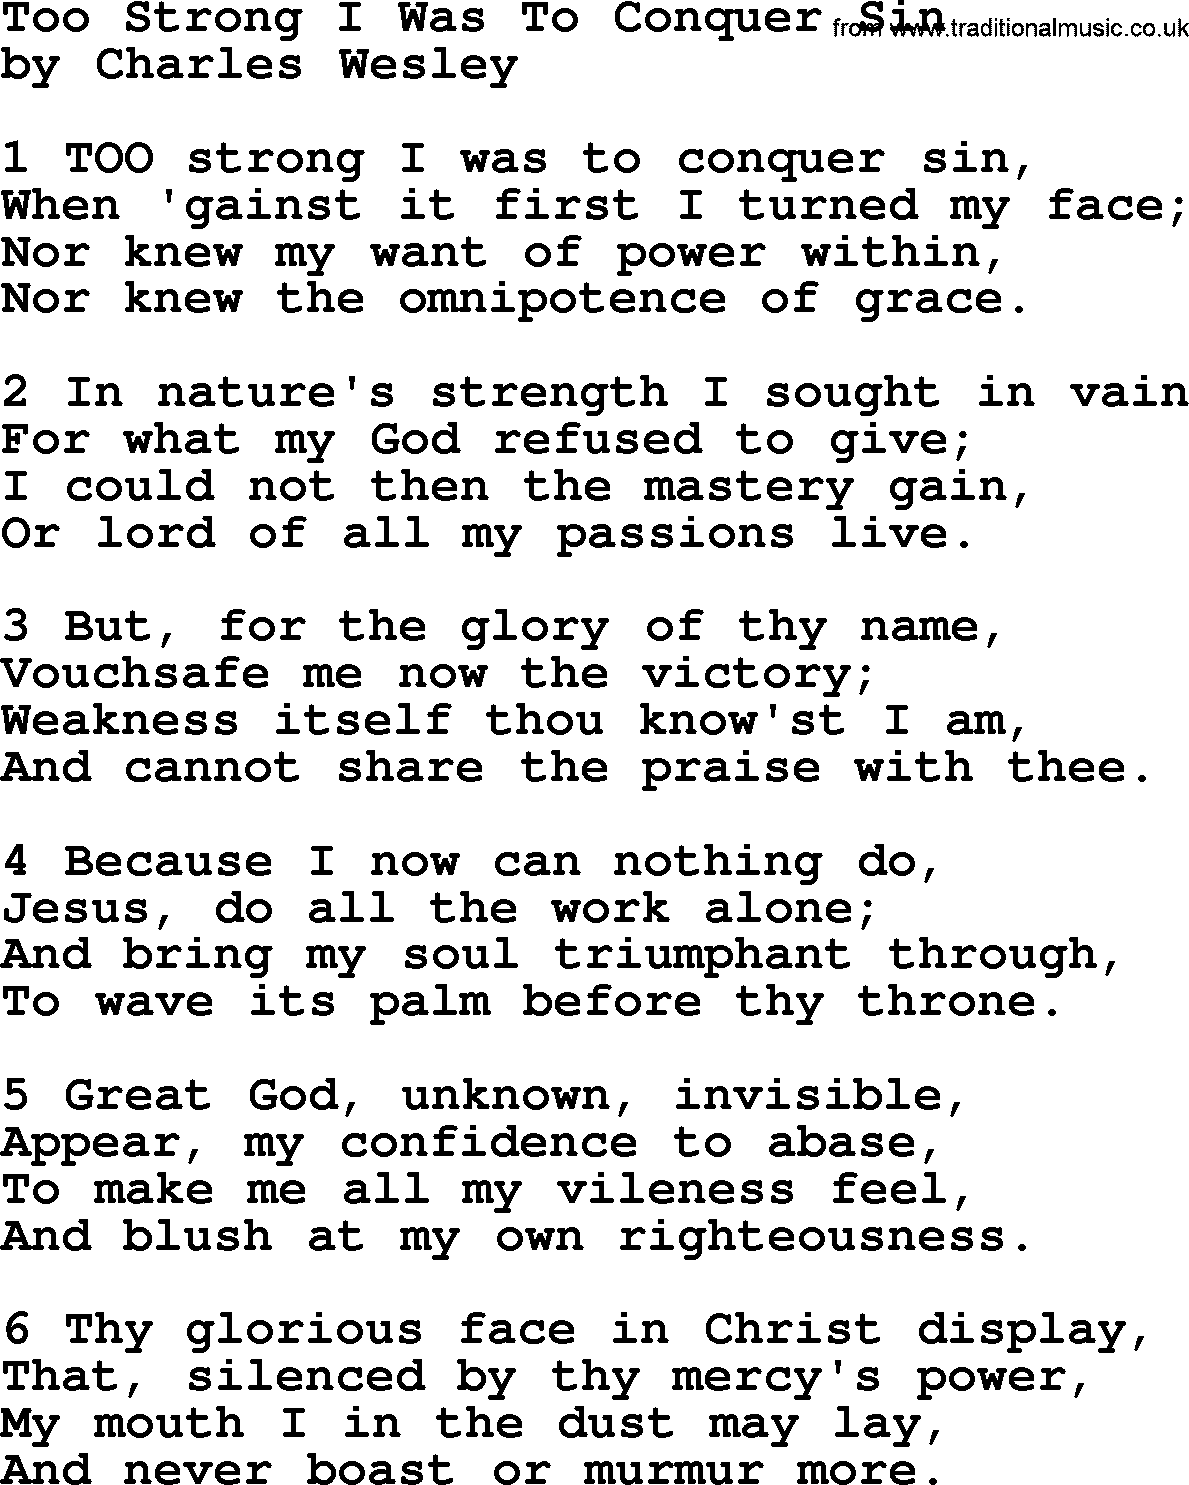 Charles Wesley hymn: Too Strong I Was To Conquer Sin, lyrics